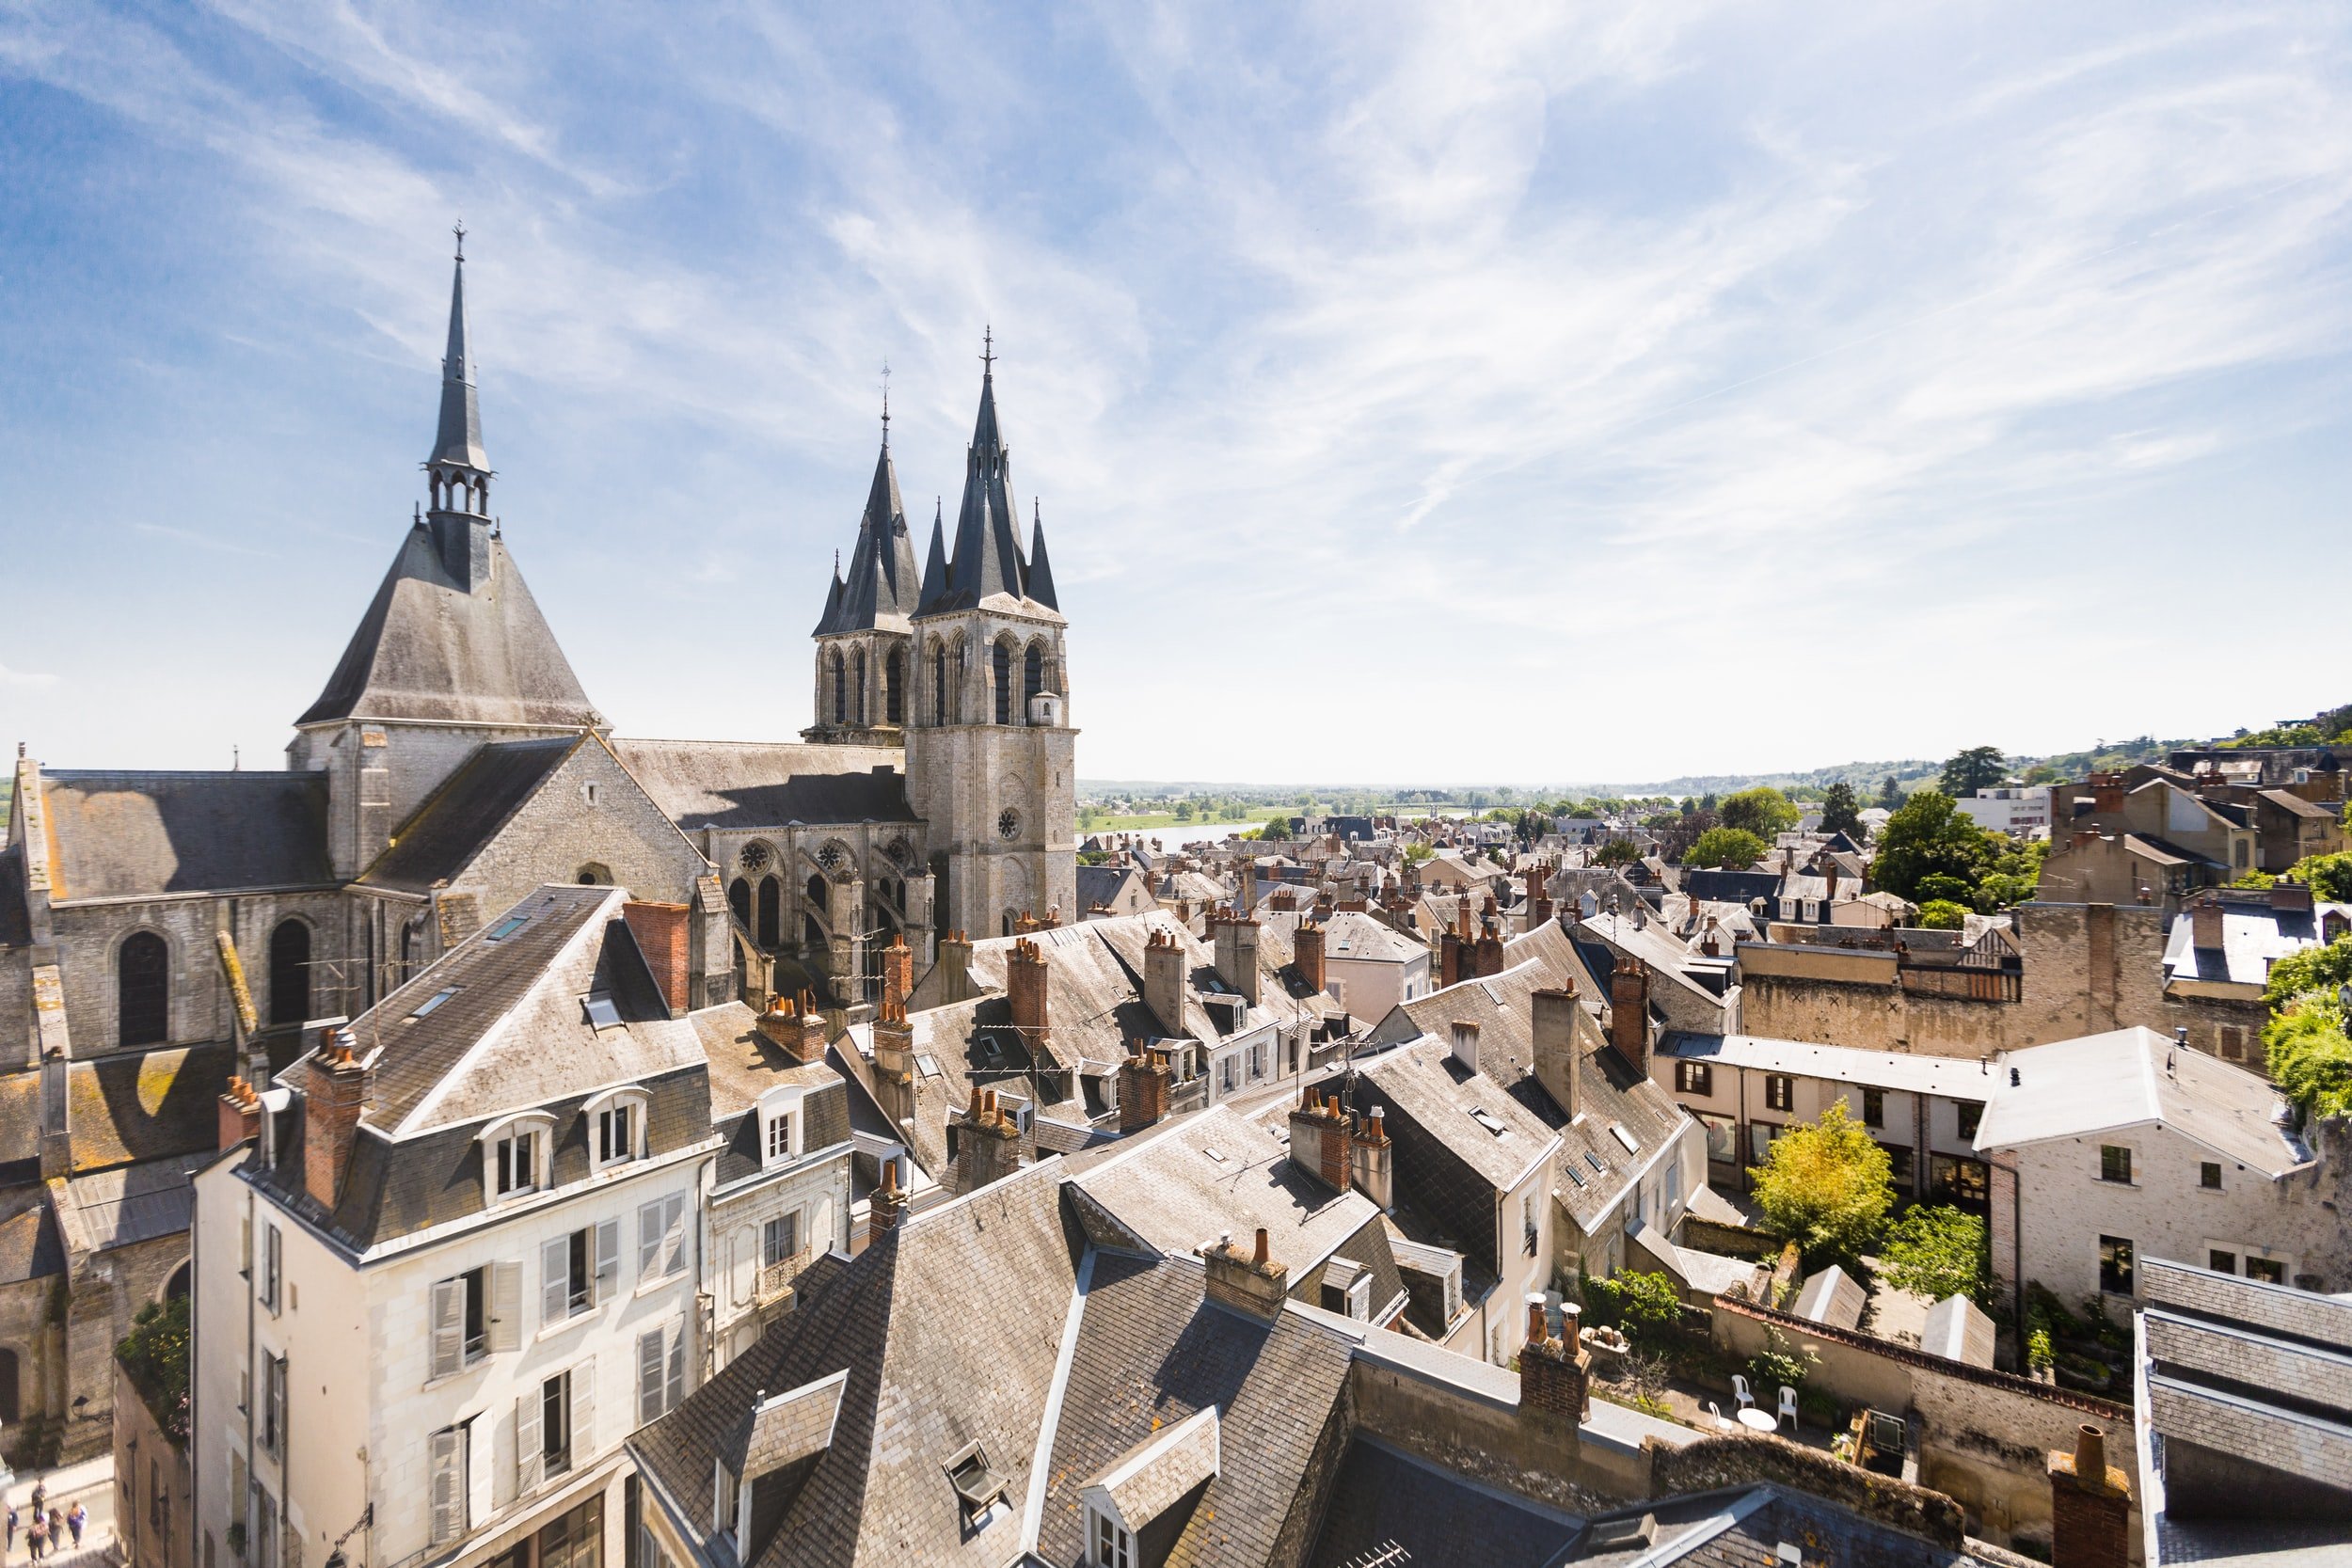 Visit the town of Blois in the Loire Valley near the Château de Chambord